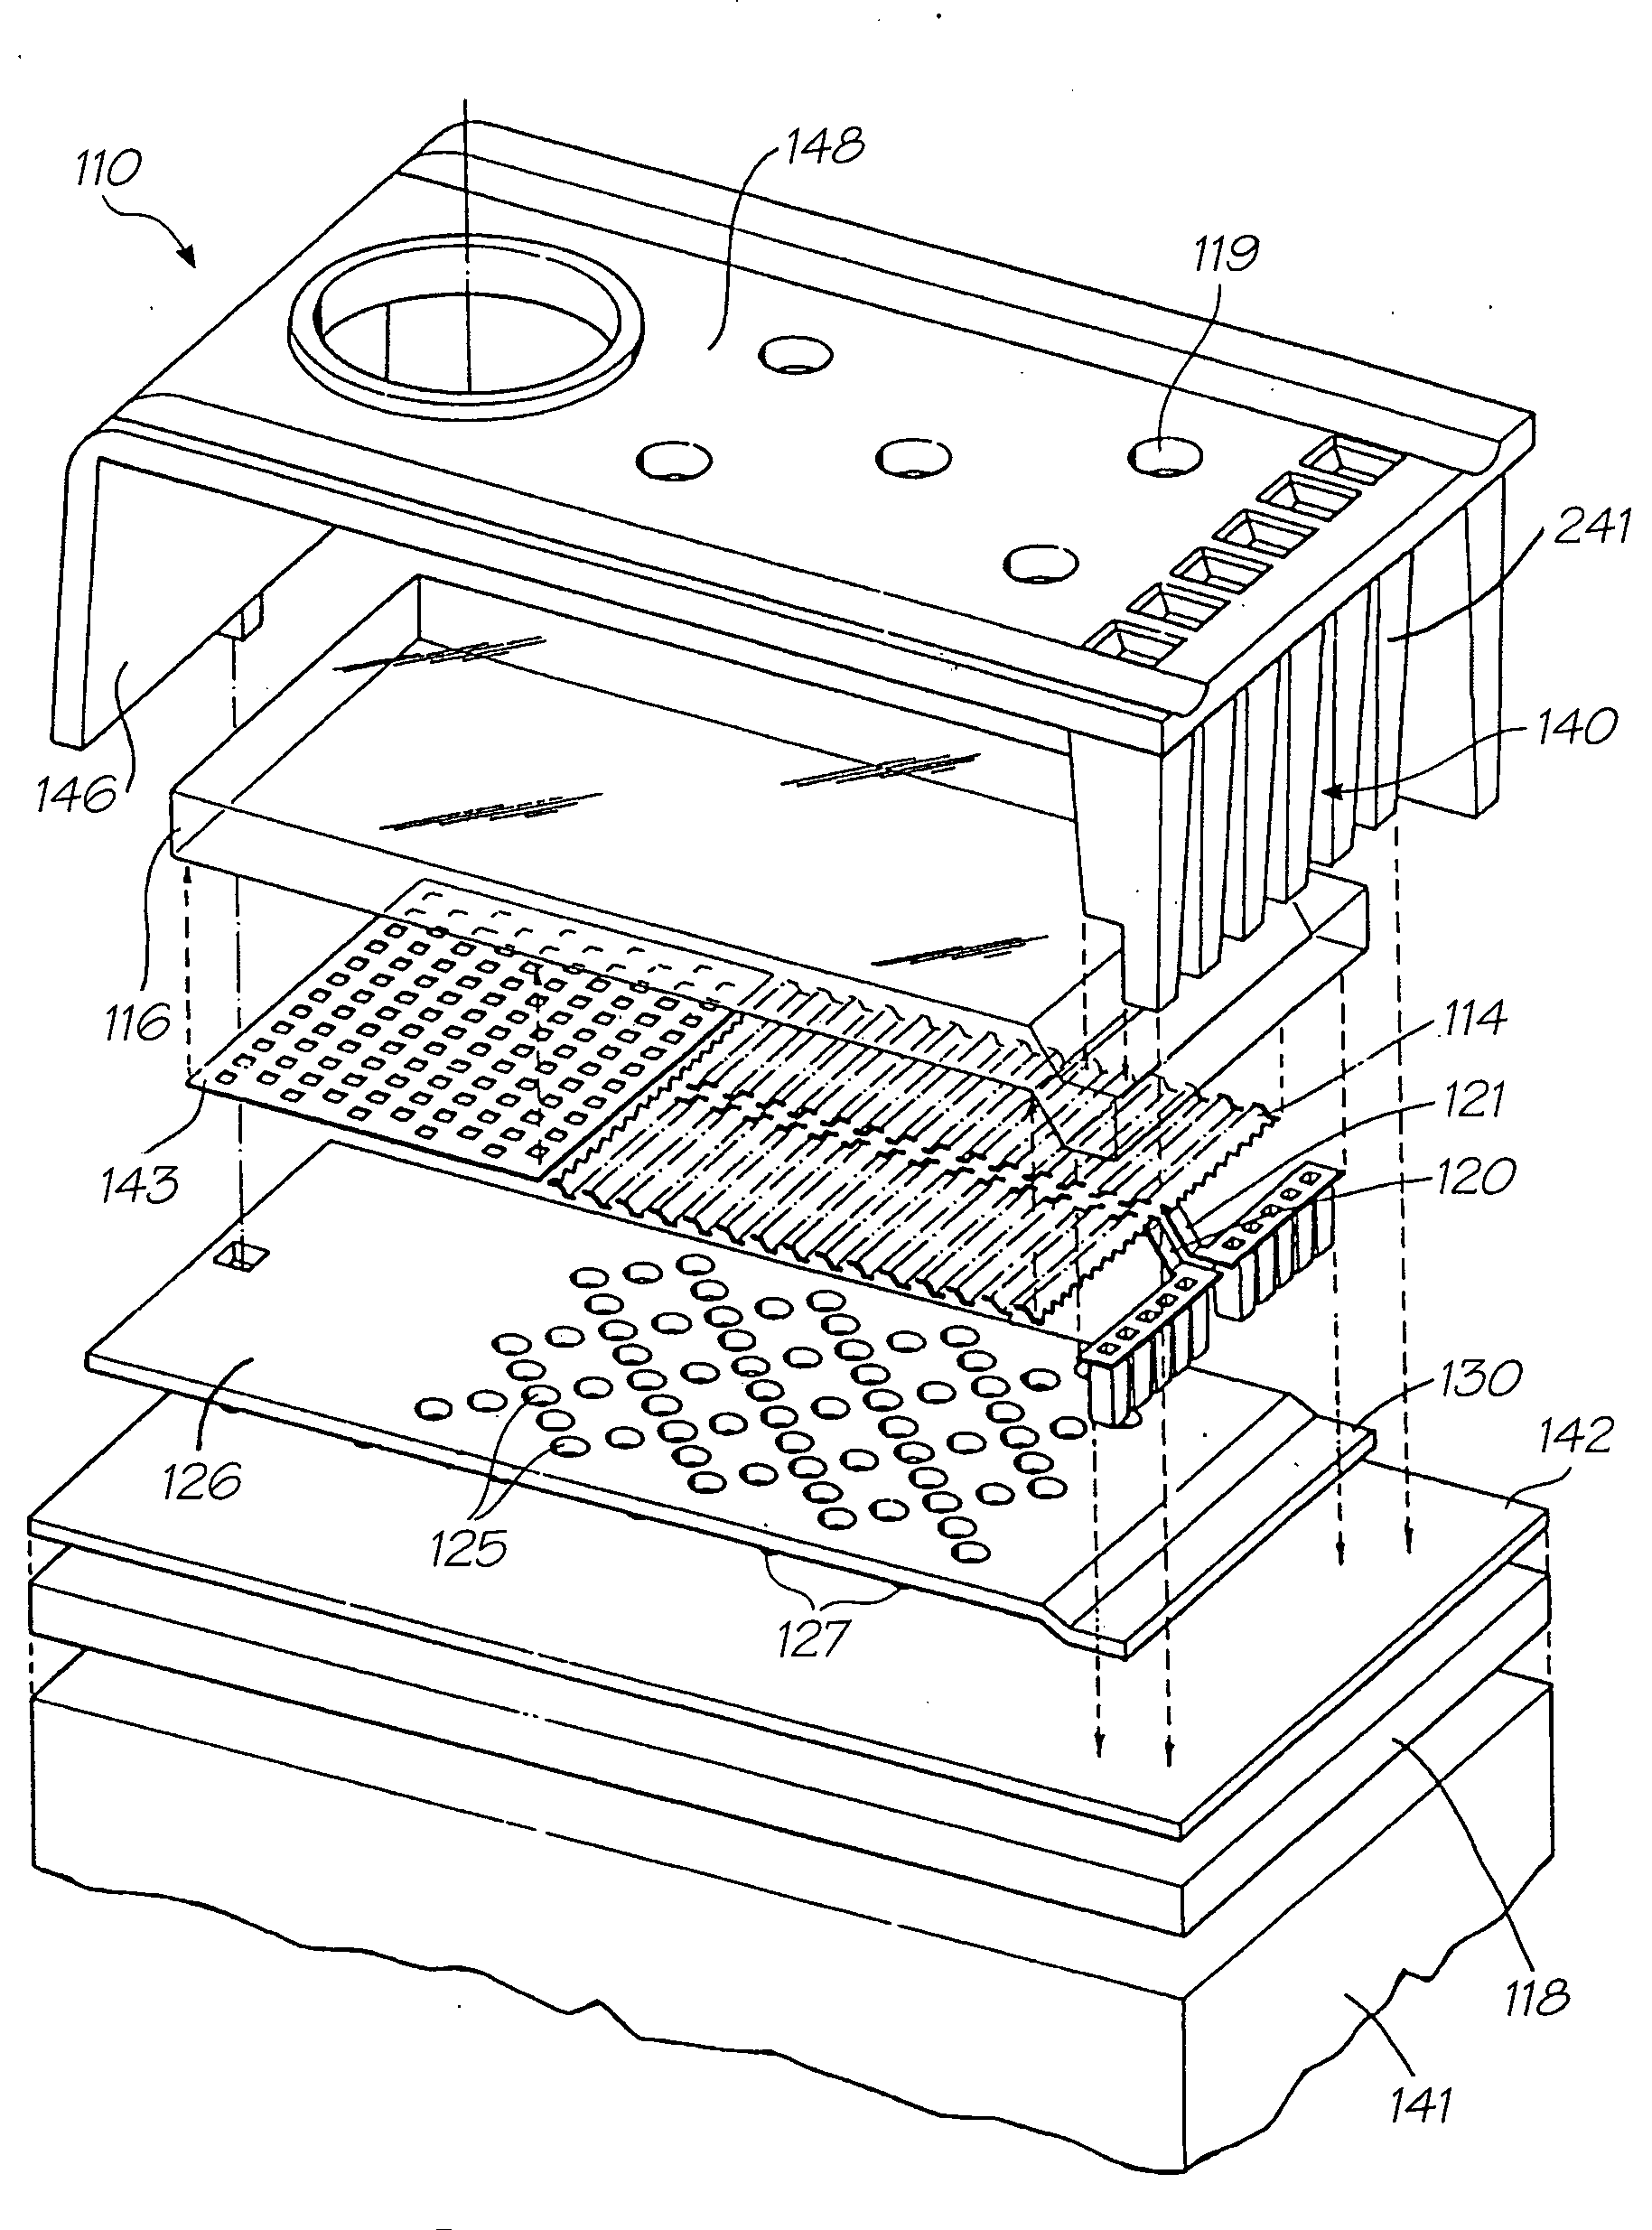 Printhead integrated circuit with low power operation